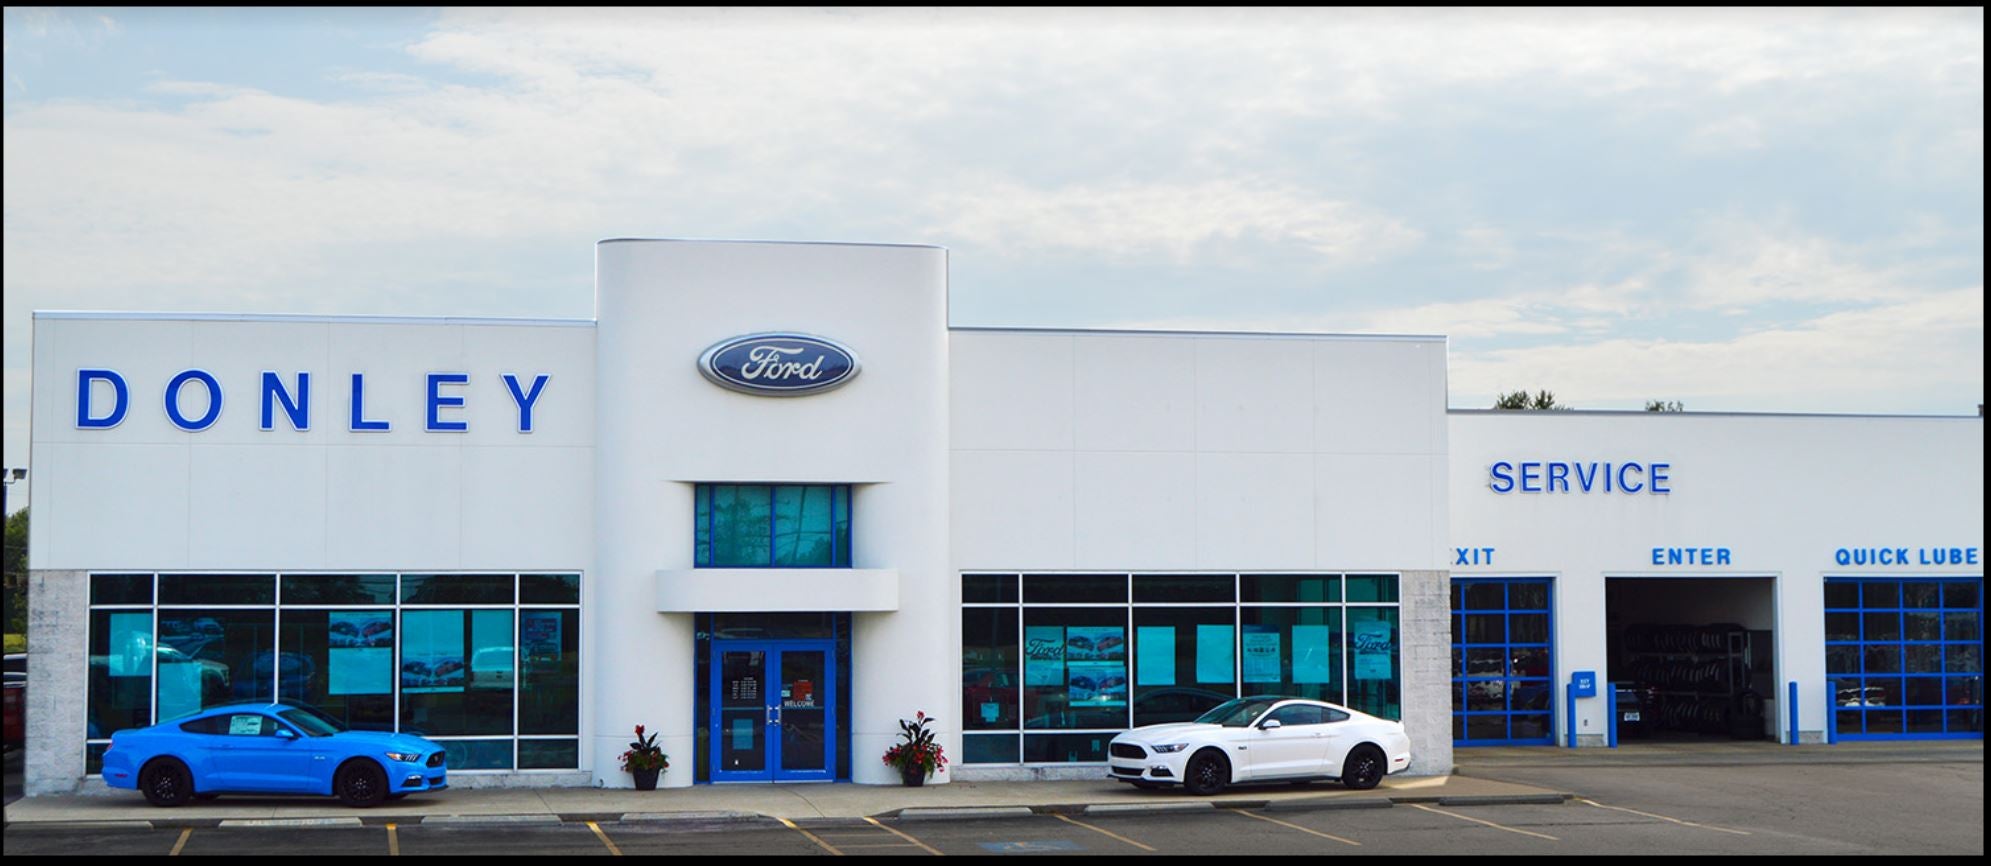 Donley Ford Shelby Dealership Exterior